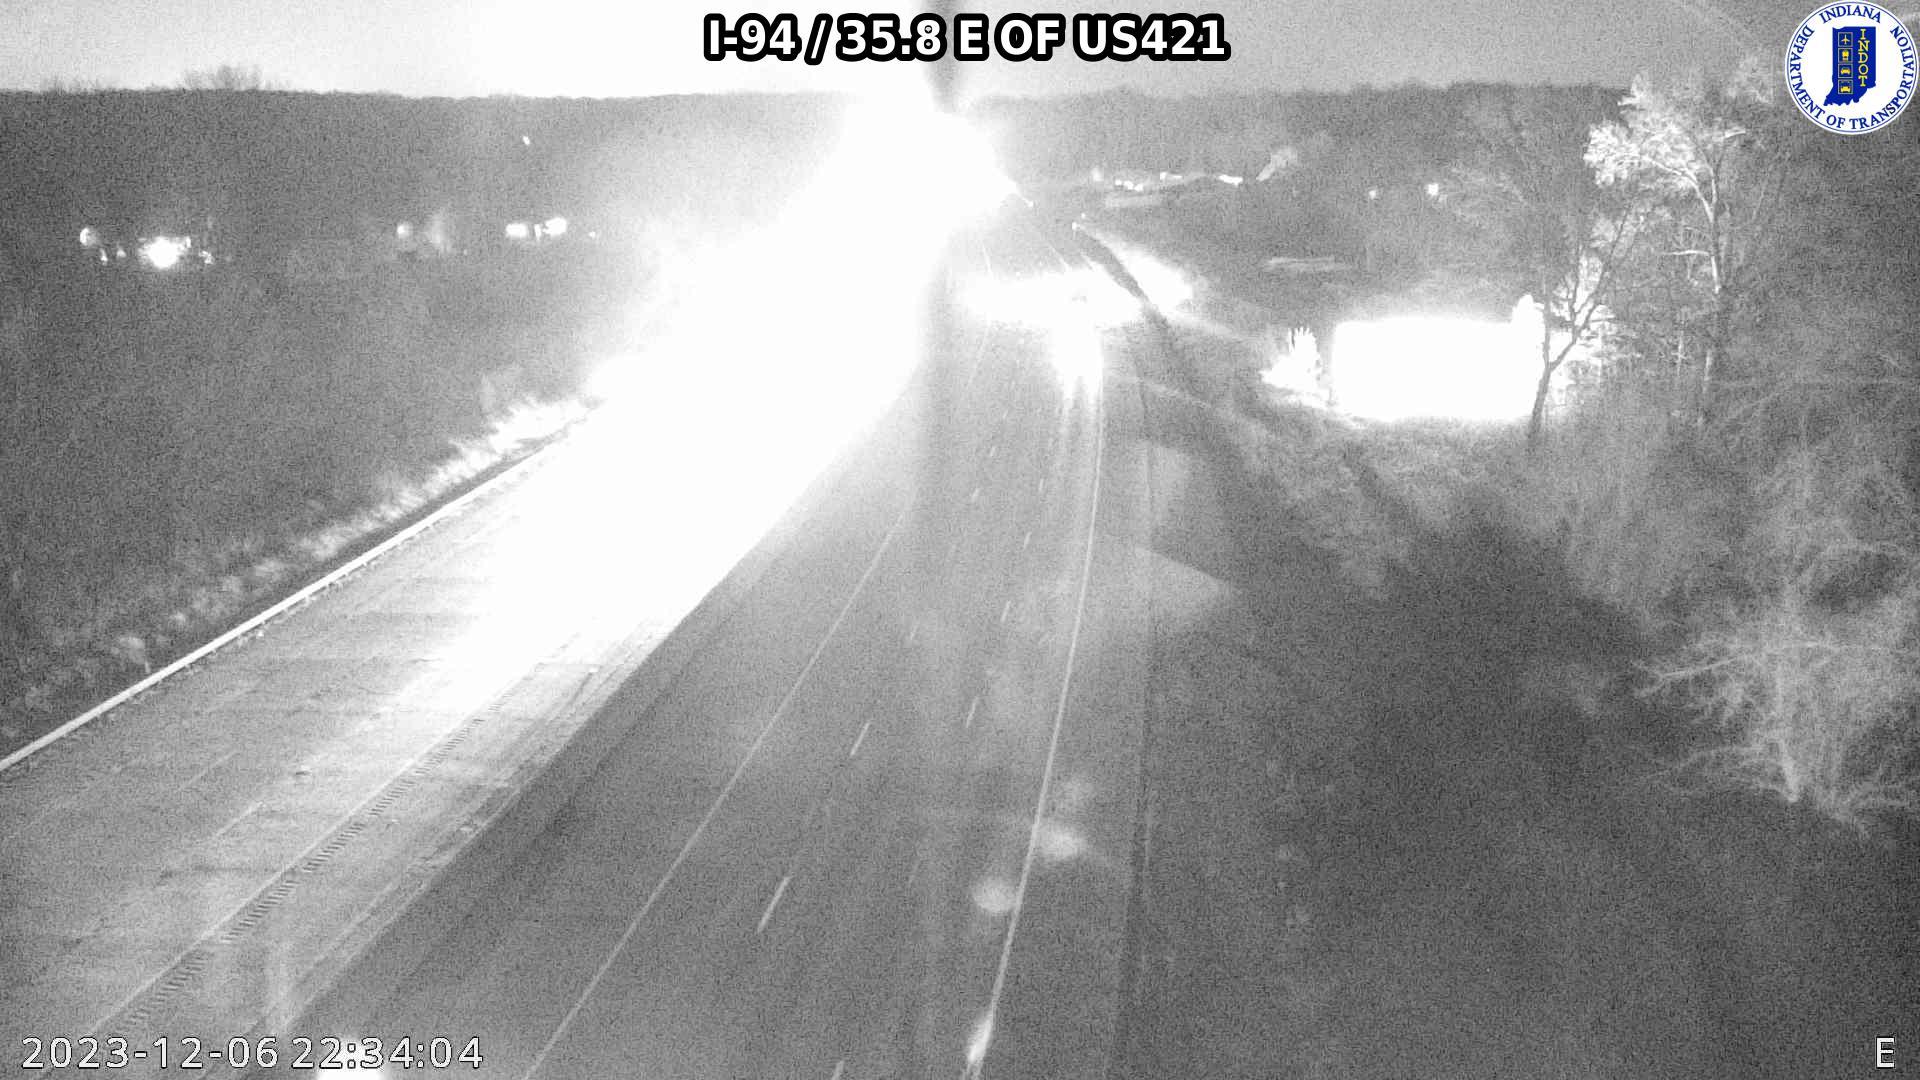 Traffic Cam Waterford: I-94: I-94 - 35.8 E OF US421: I-94 - 35.8 E OF US421 Player